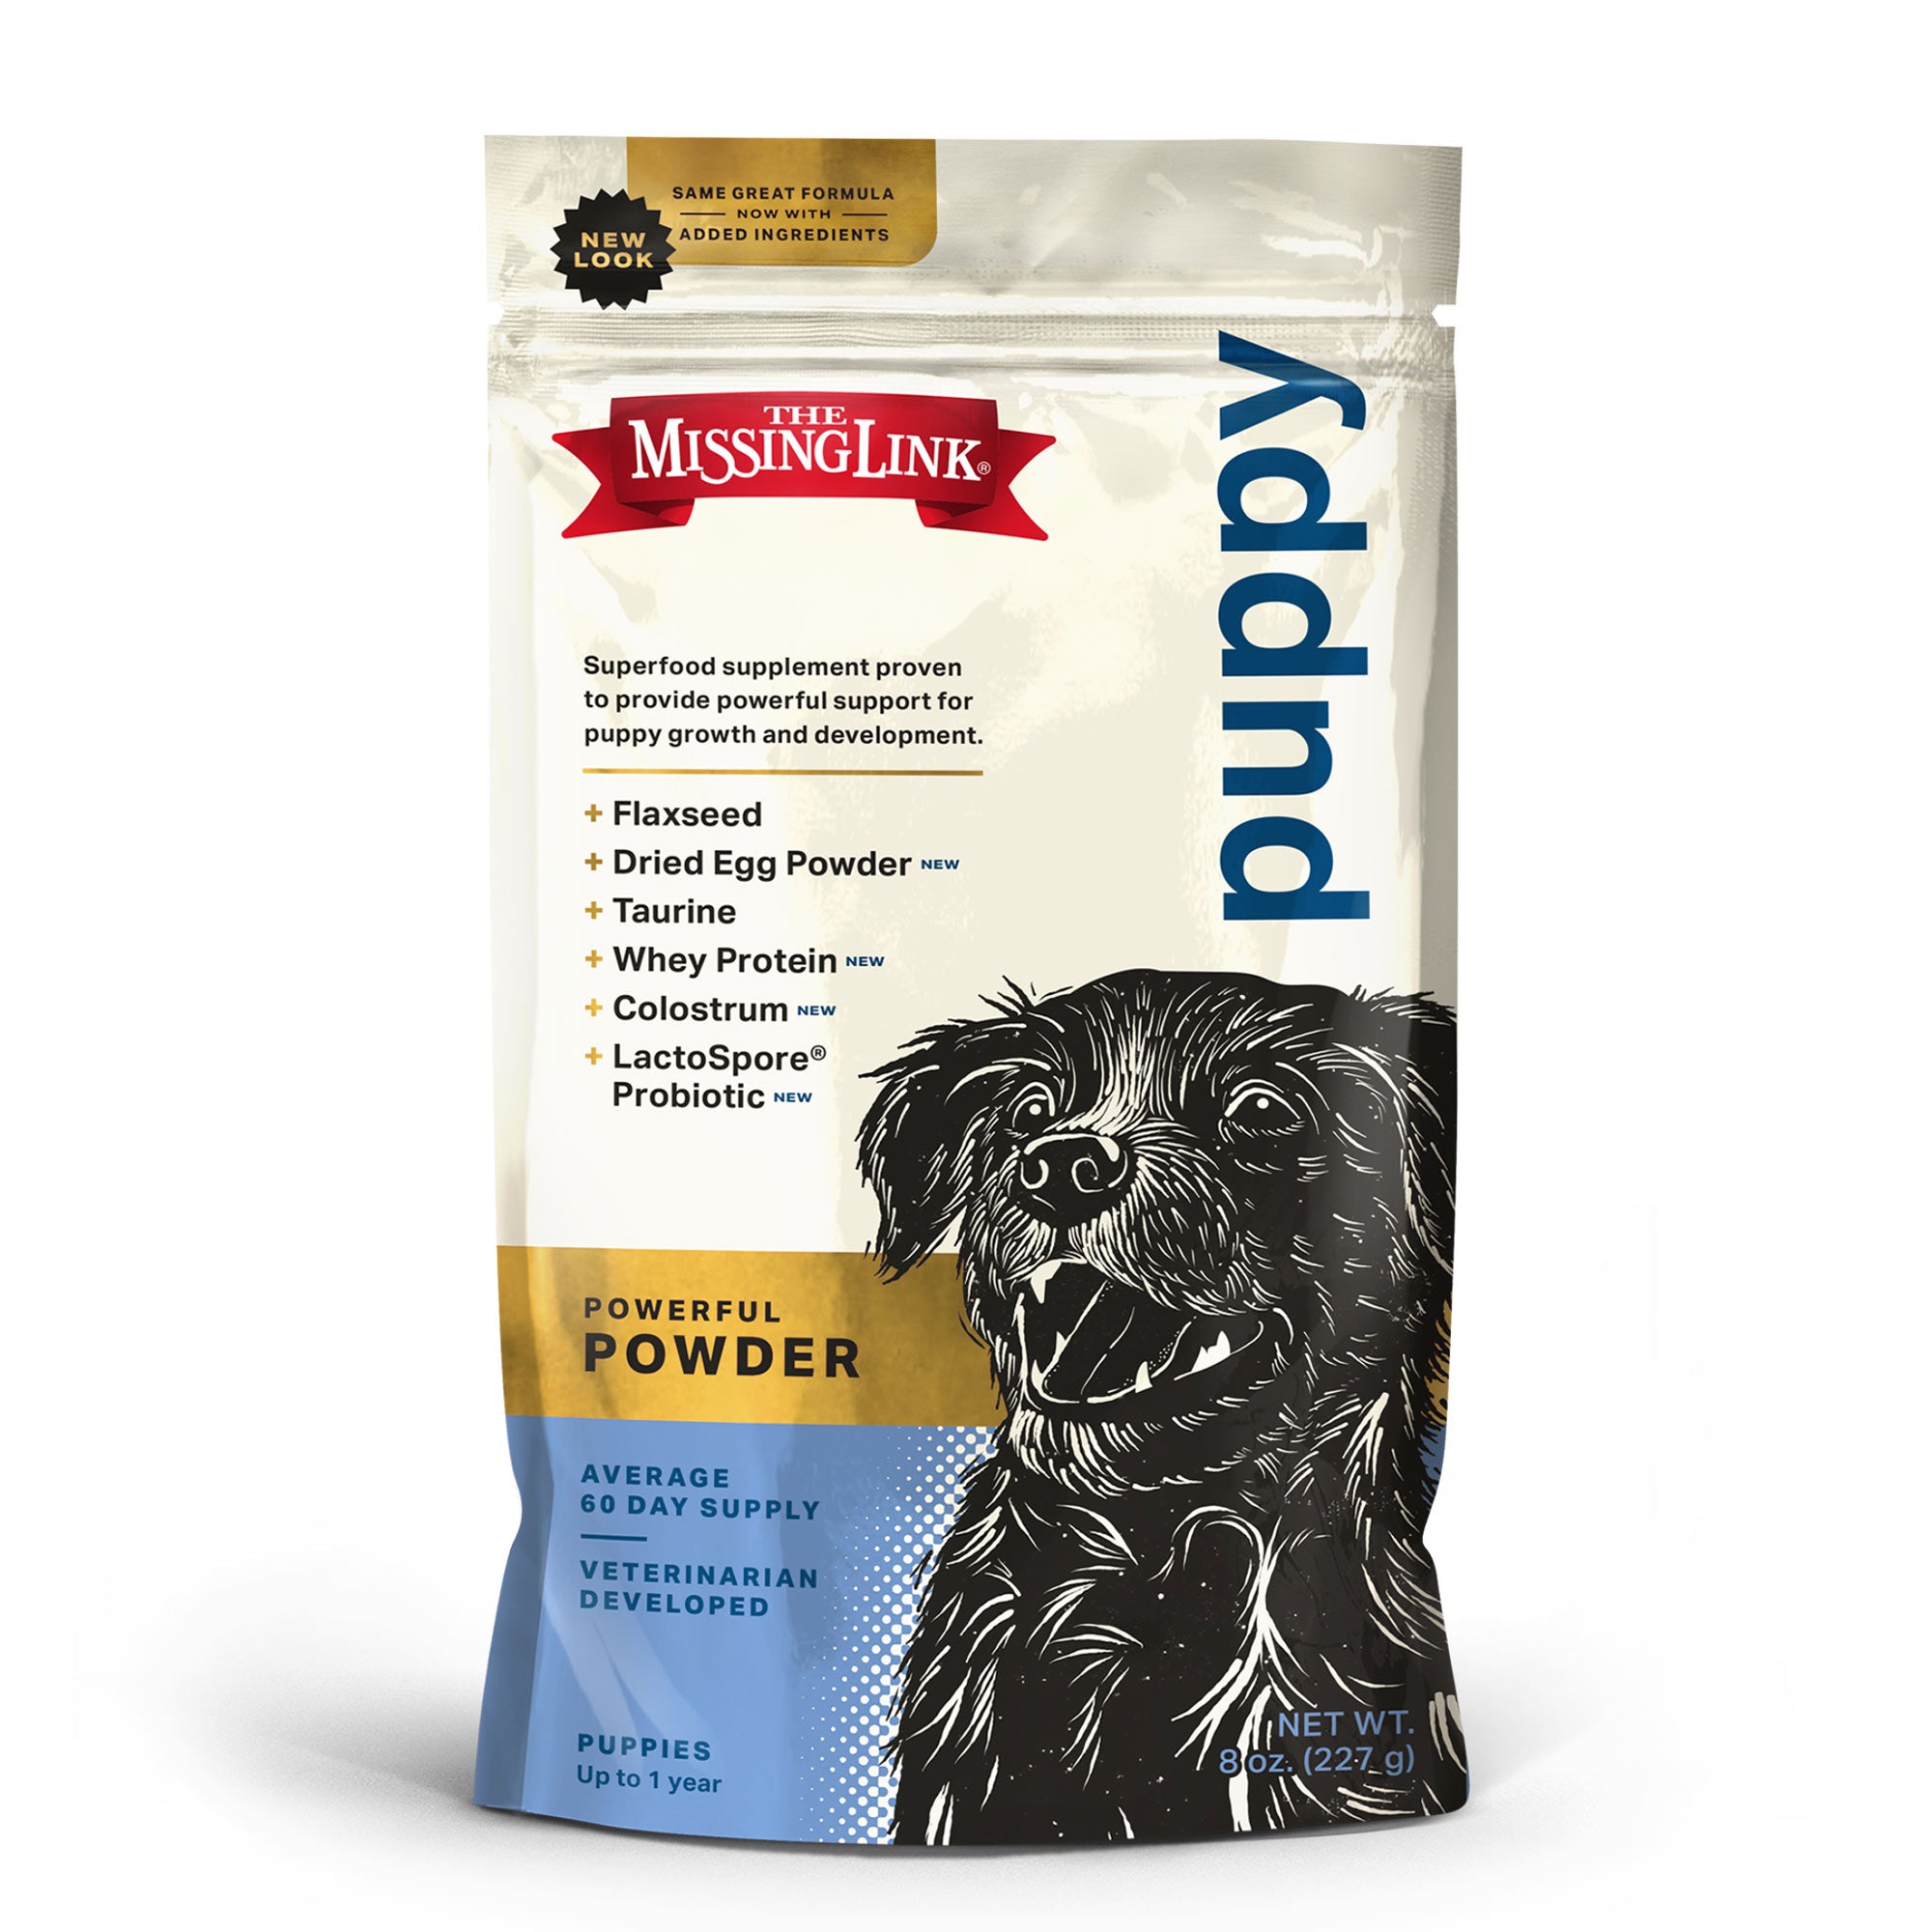 The Missing Link powerful powder puppy formulated supplement.